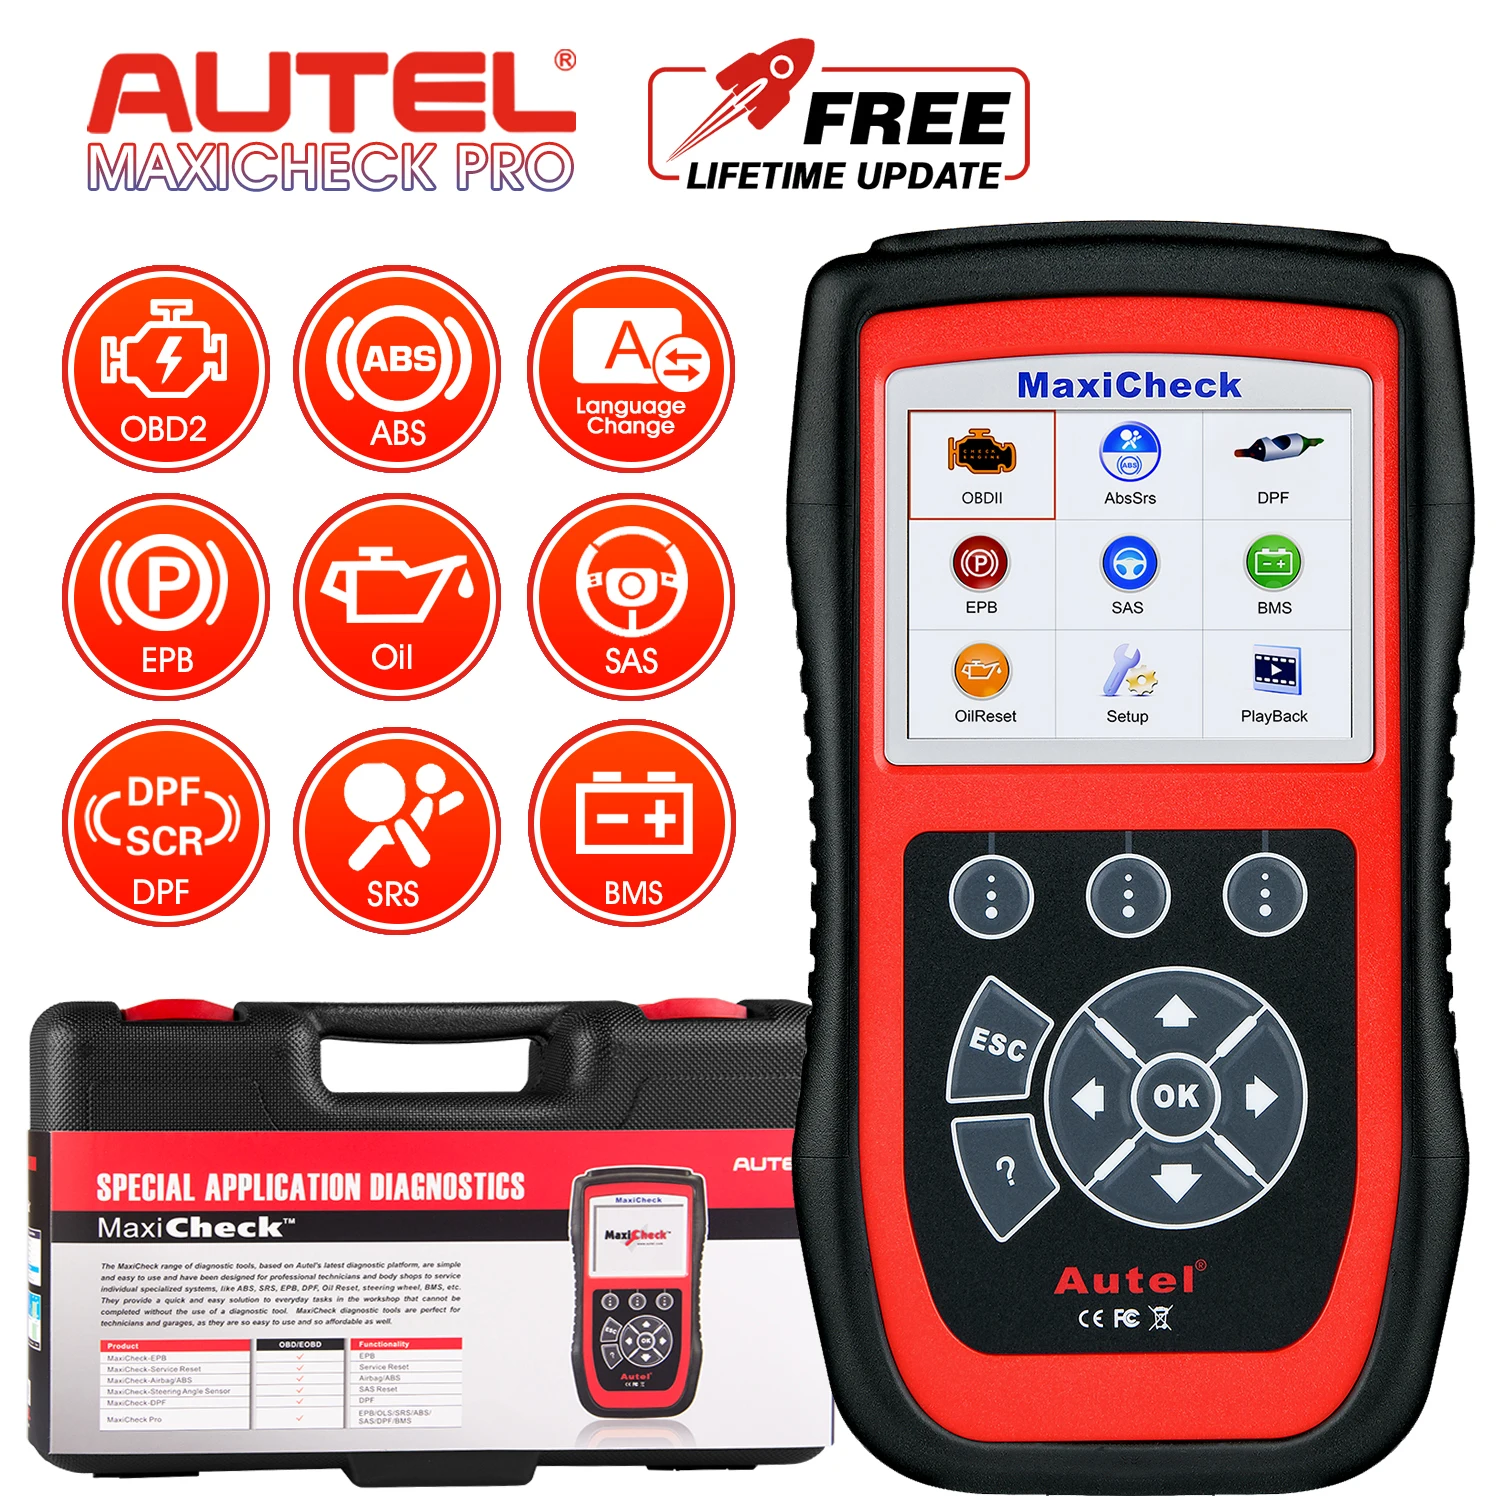 Autel MaxiCheck Pro Car Diagnostic Tool, OBD2 Scanner With ABS SRS Airbag, Oil Reset, SAS, EPB, DPF, BMS